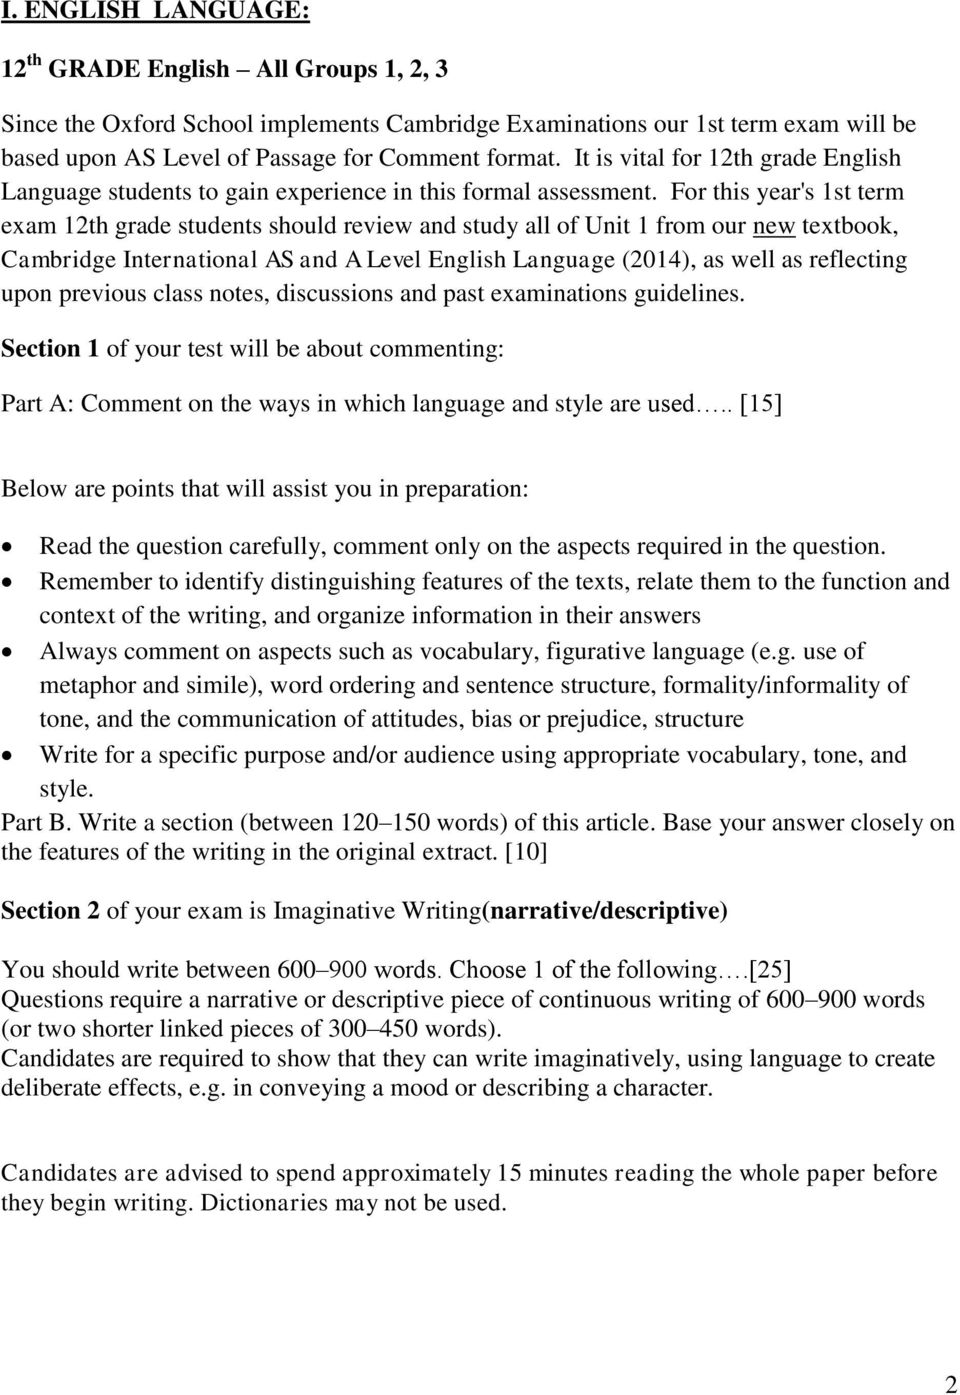 For this year's 1st term exam 12th grade students should review and study all of Unit 1 from our new textbook, Cambridge International AS and A Level English Language (2014), as well as reflecting